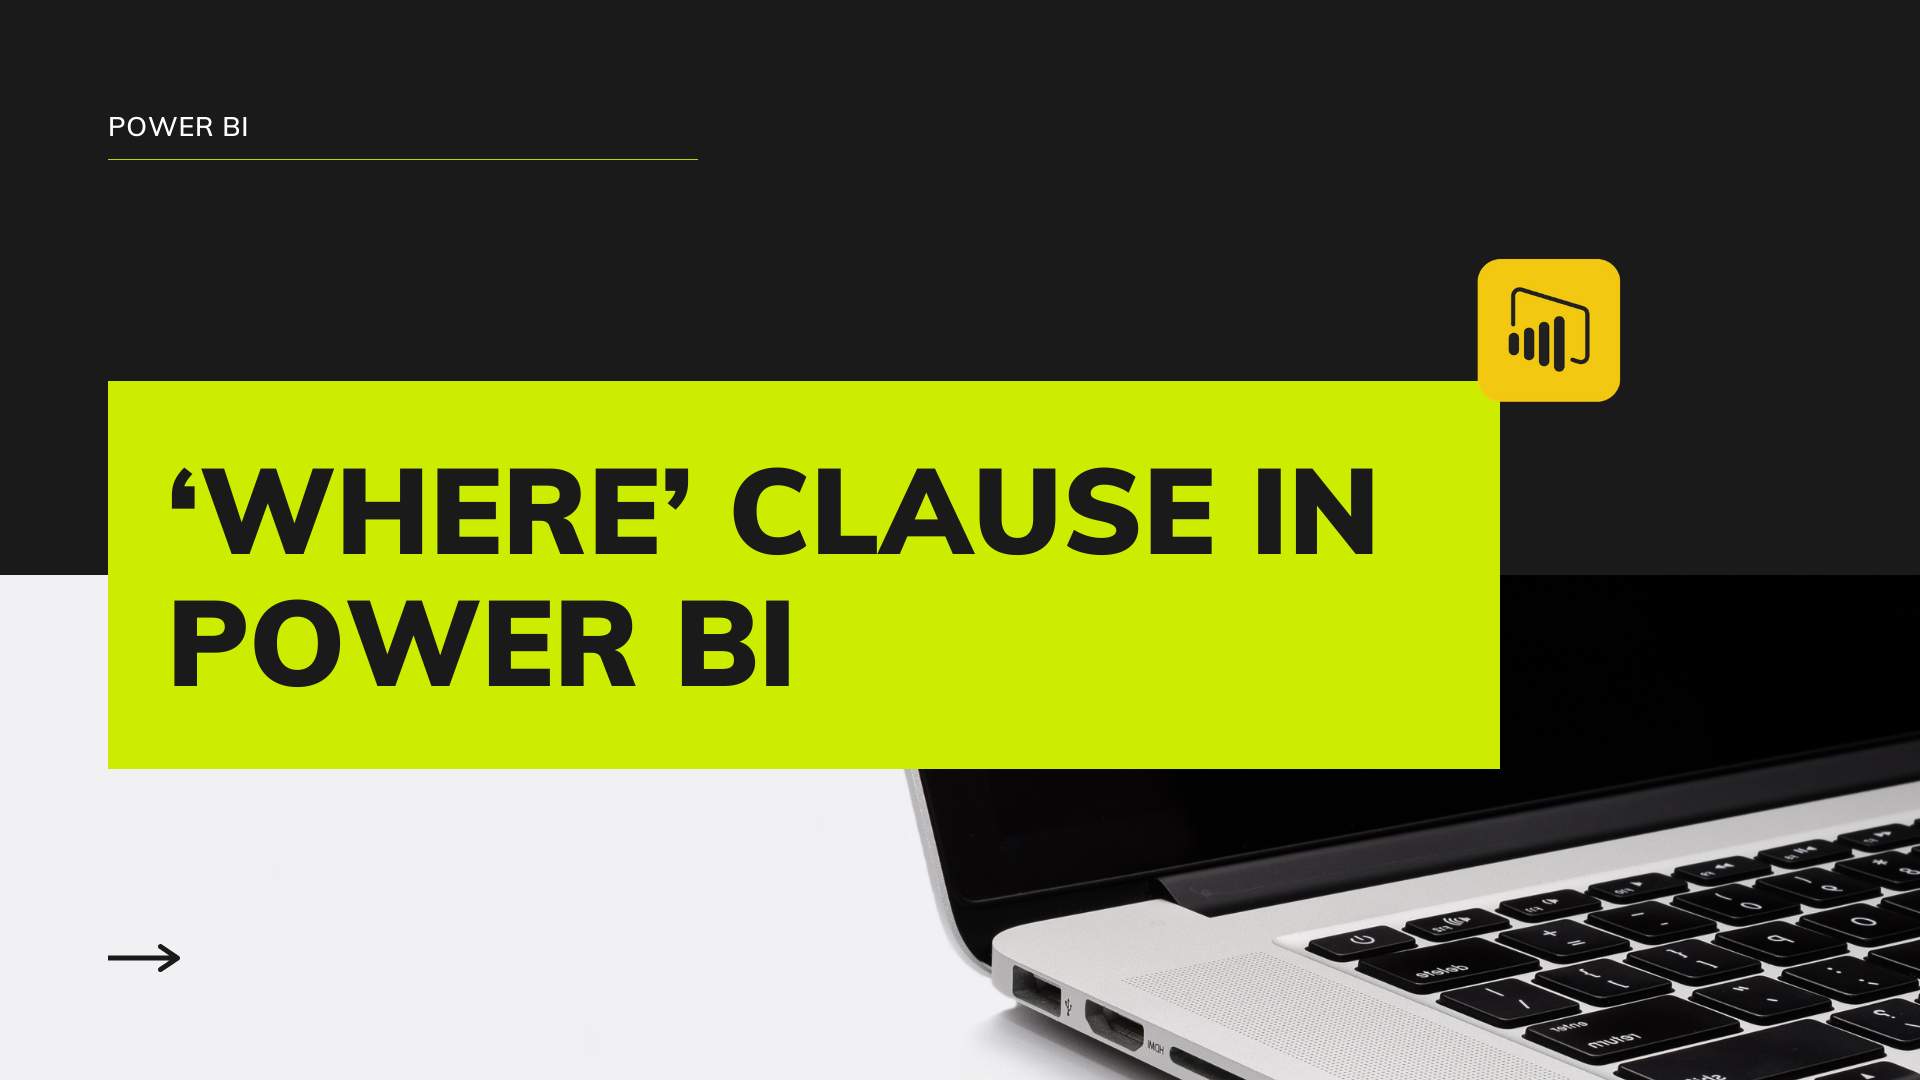 Can We Use A ‘Where’ Clause In Power BI?